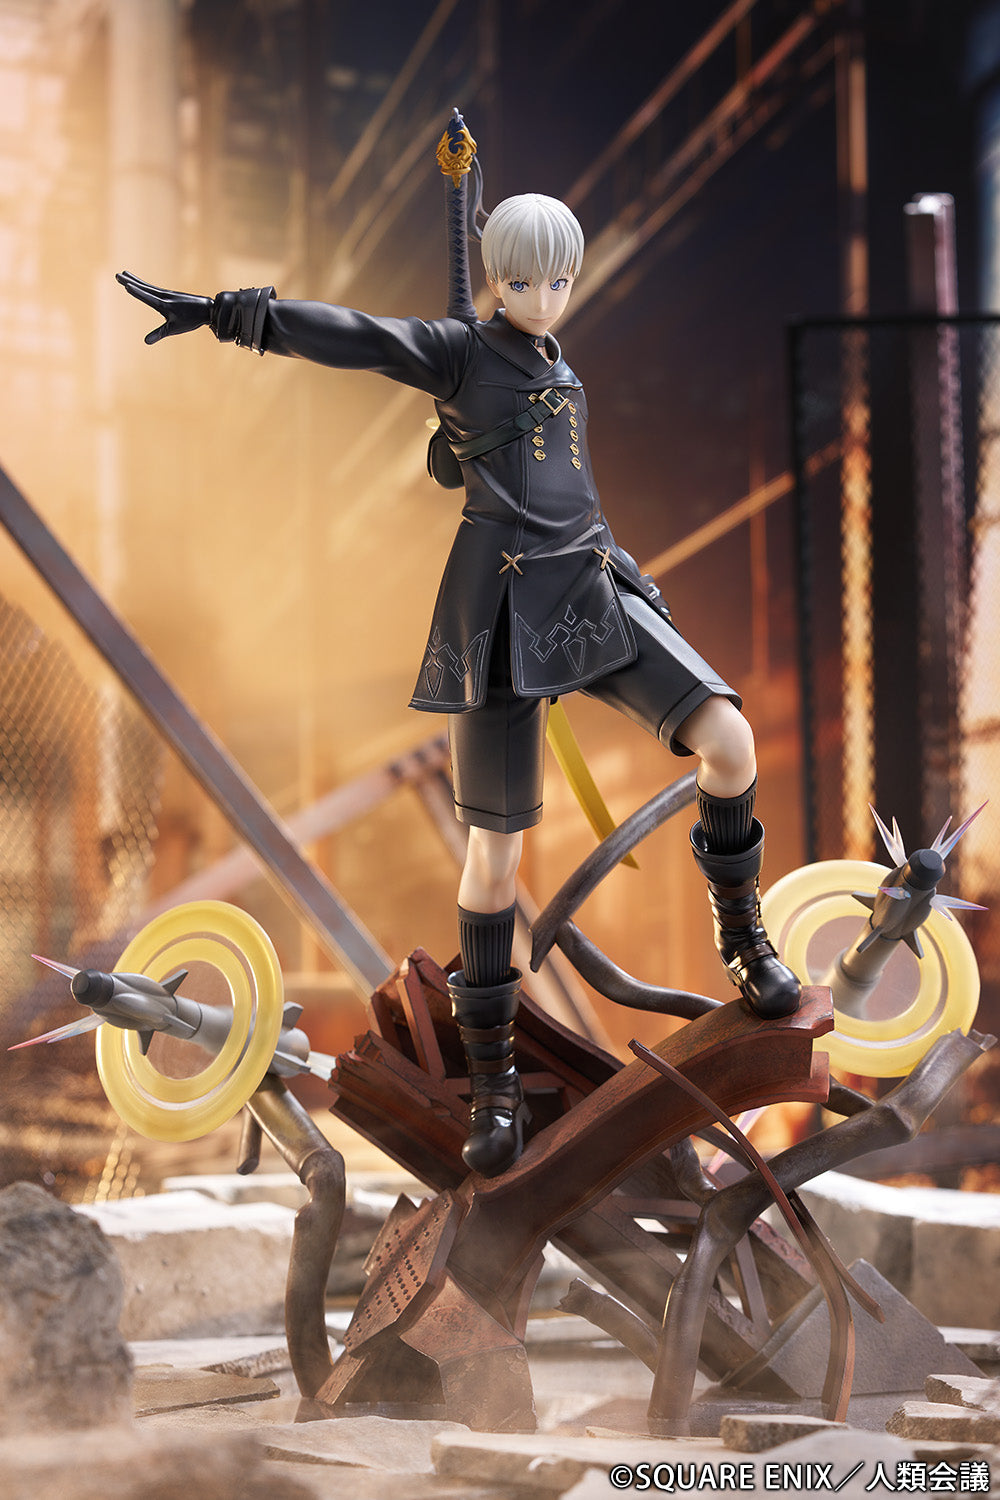 TV Anime "NieR:Automata Ver1.1a" 9S (YoRHa No.9 Type S) -Search-and-Destroy- 1/7 Complete Figure